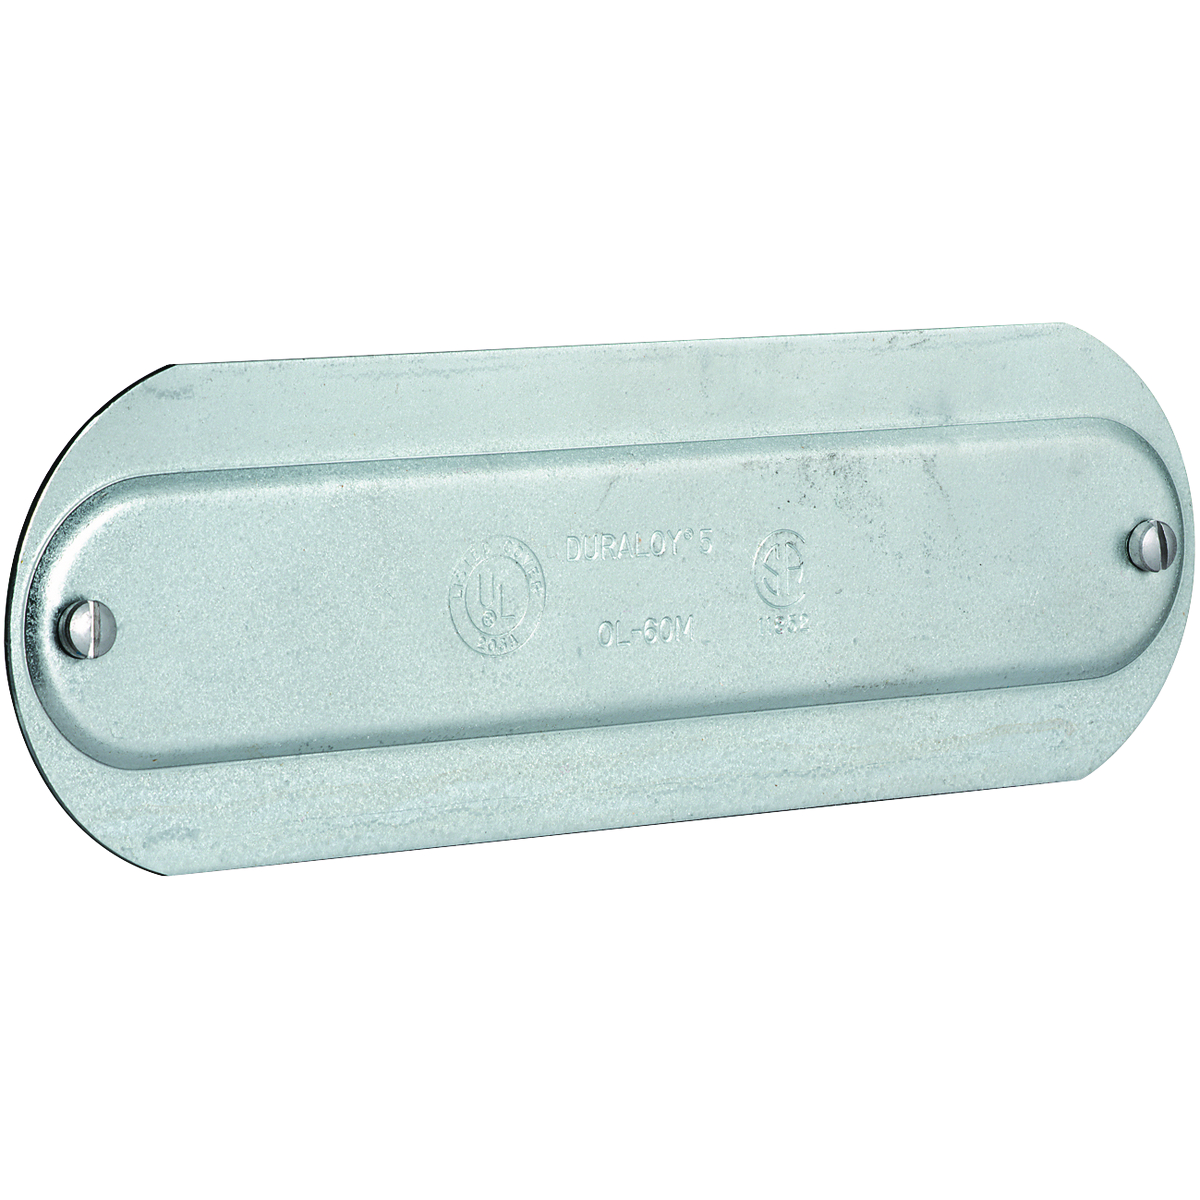 O SERIES/DURALOY 5 SERIES - STEEL STAMPED CONDUIT BODY COVER - HUB SIZE1-1/4 INCH